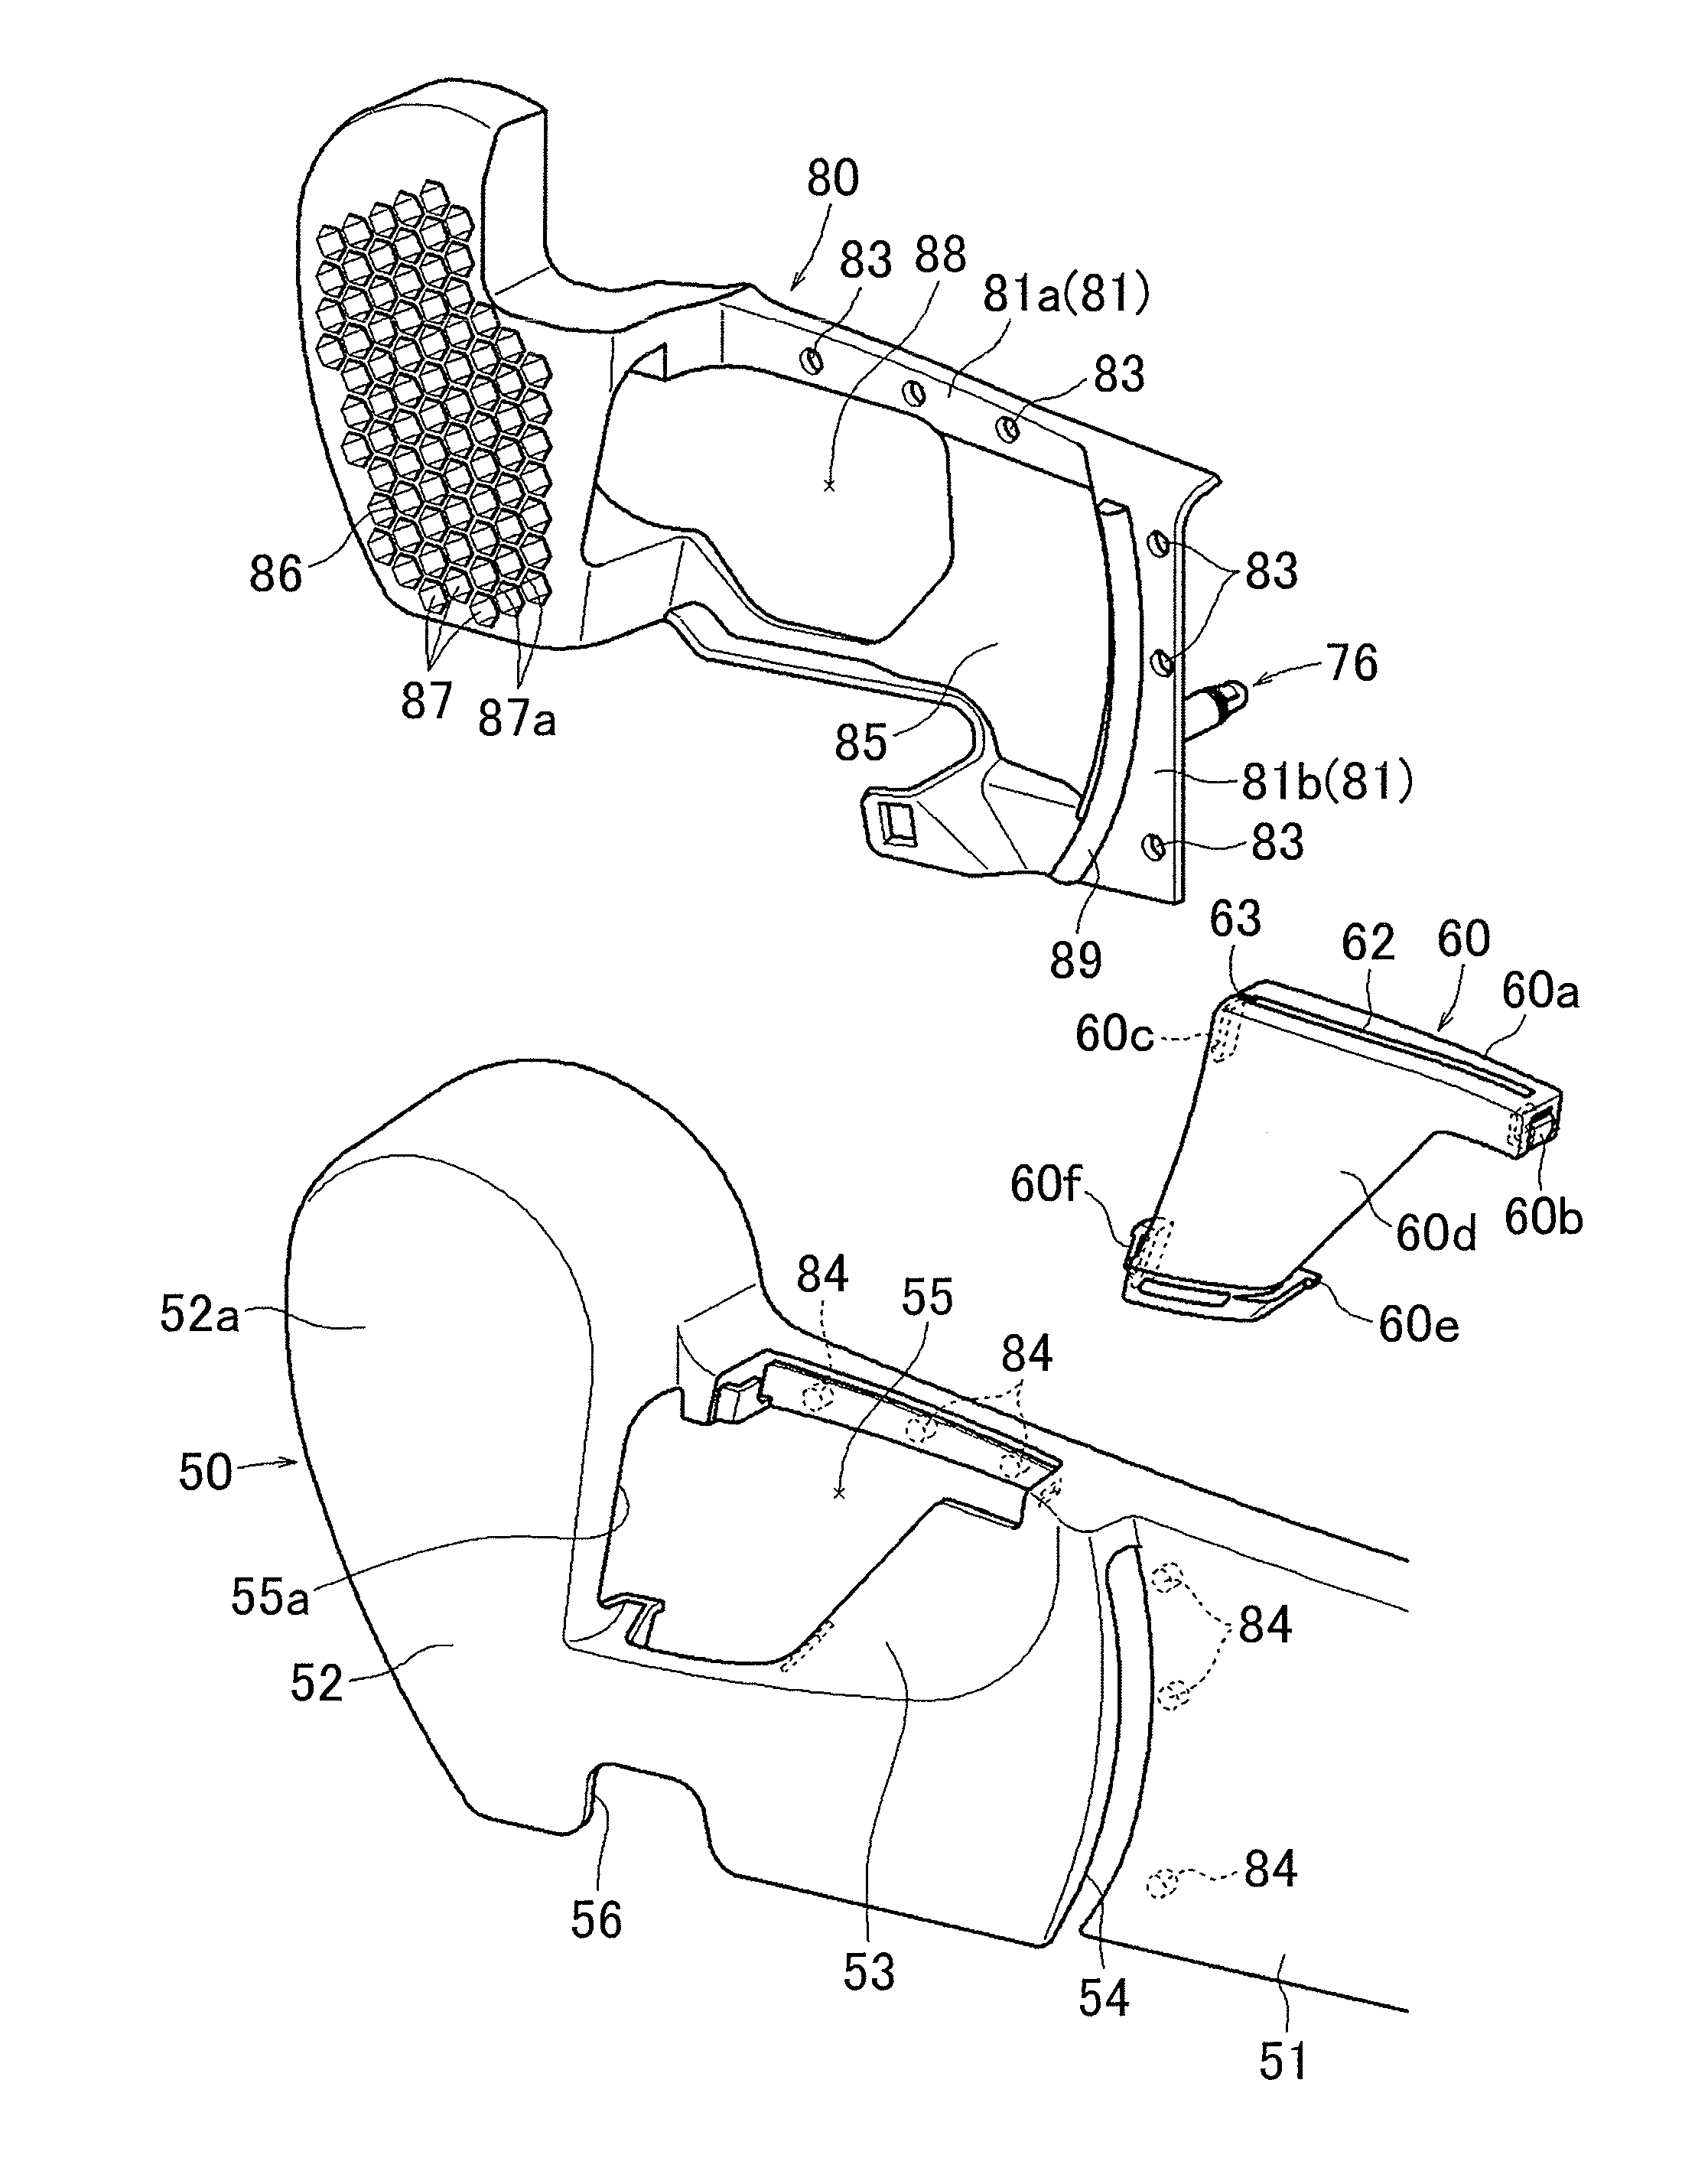 Side shield structure for vehicle seat